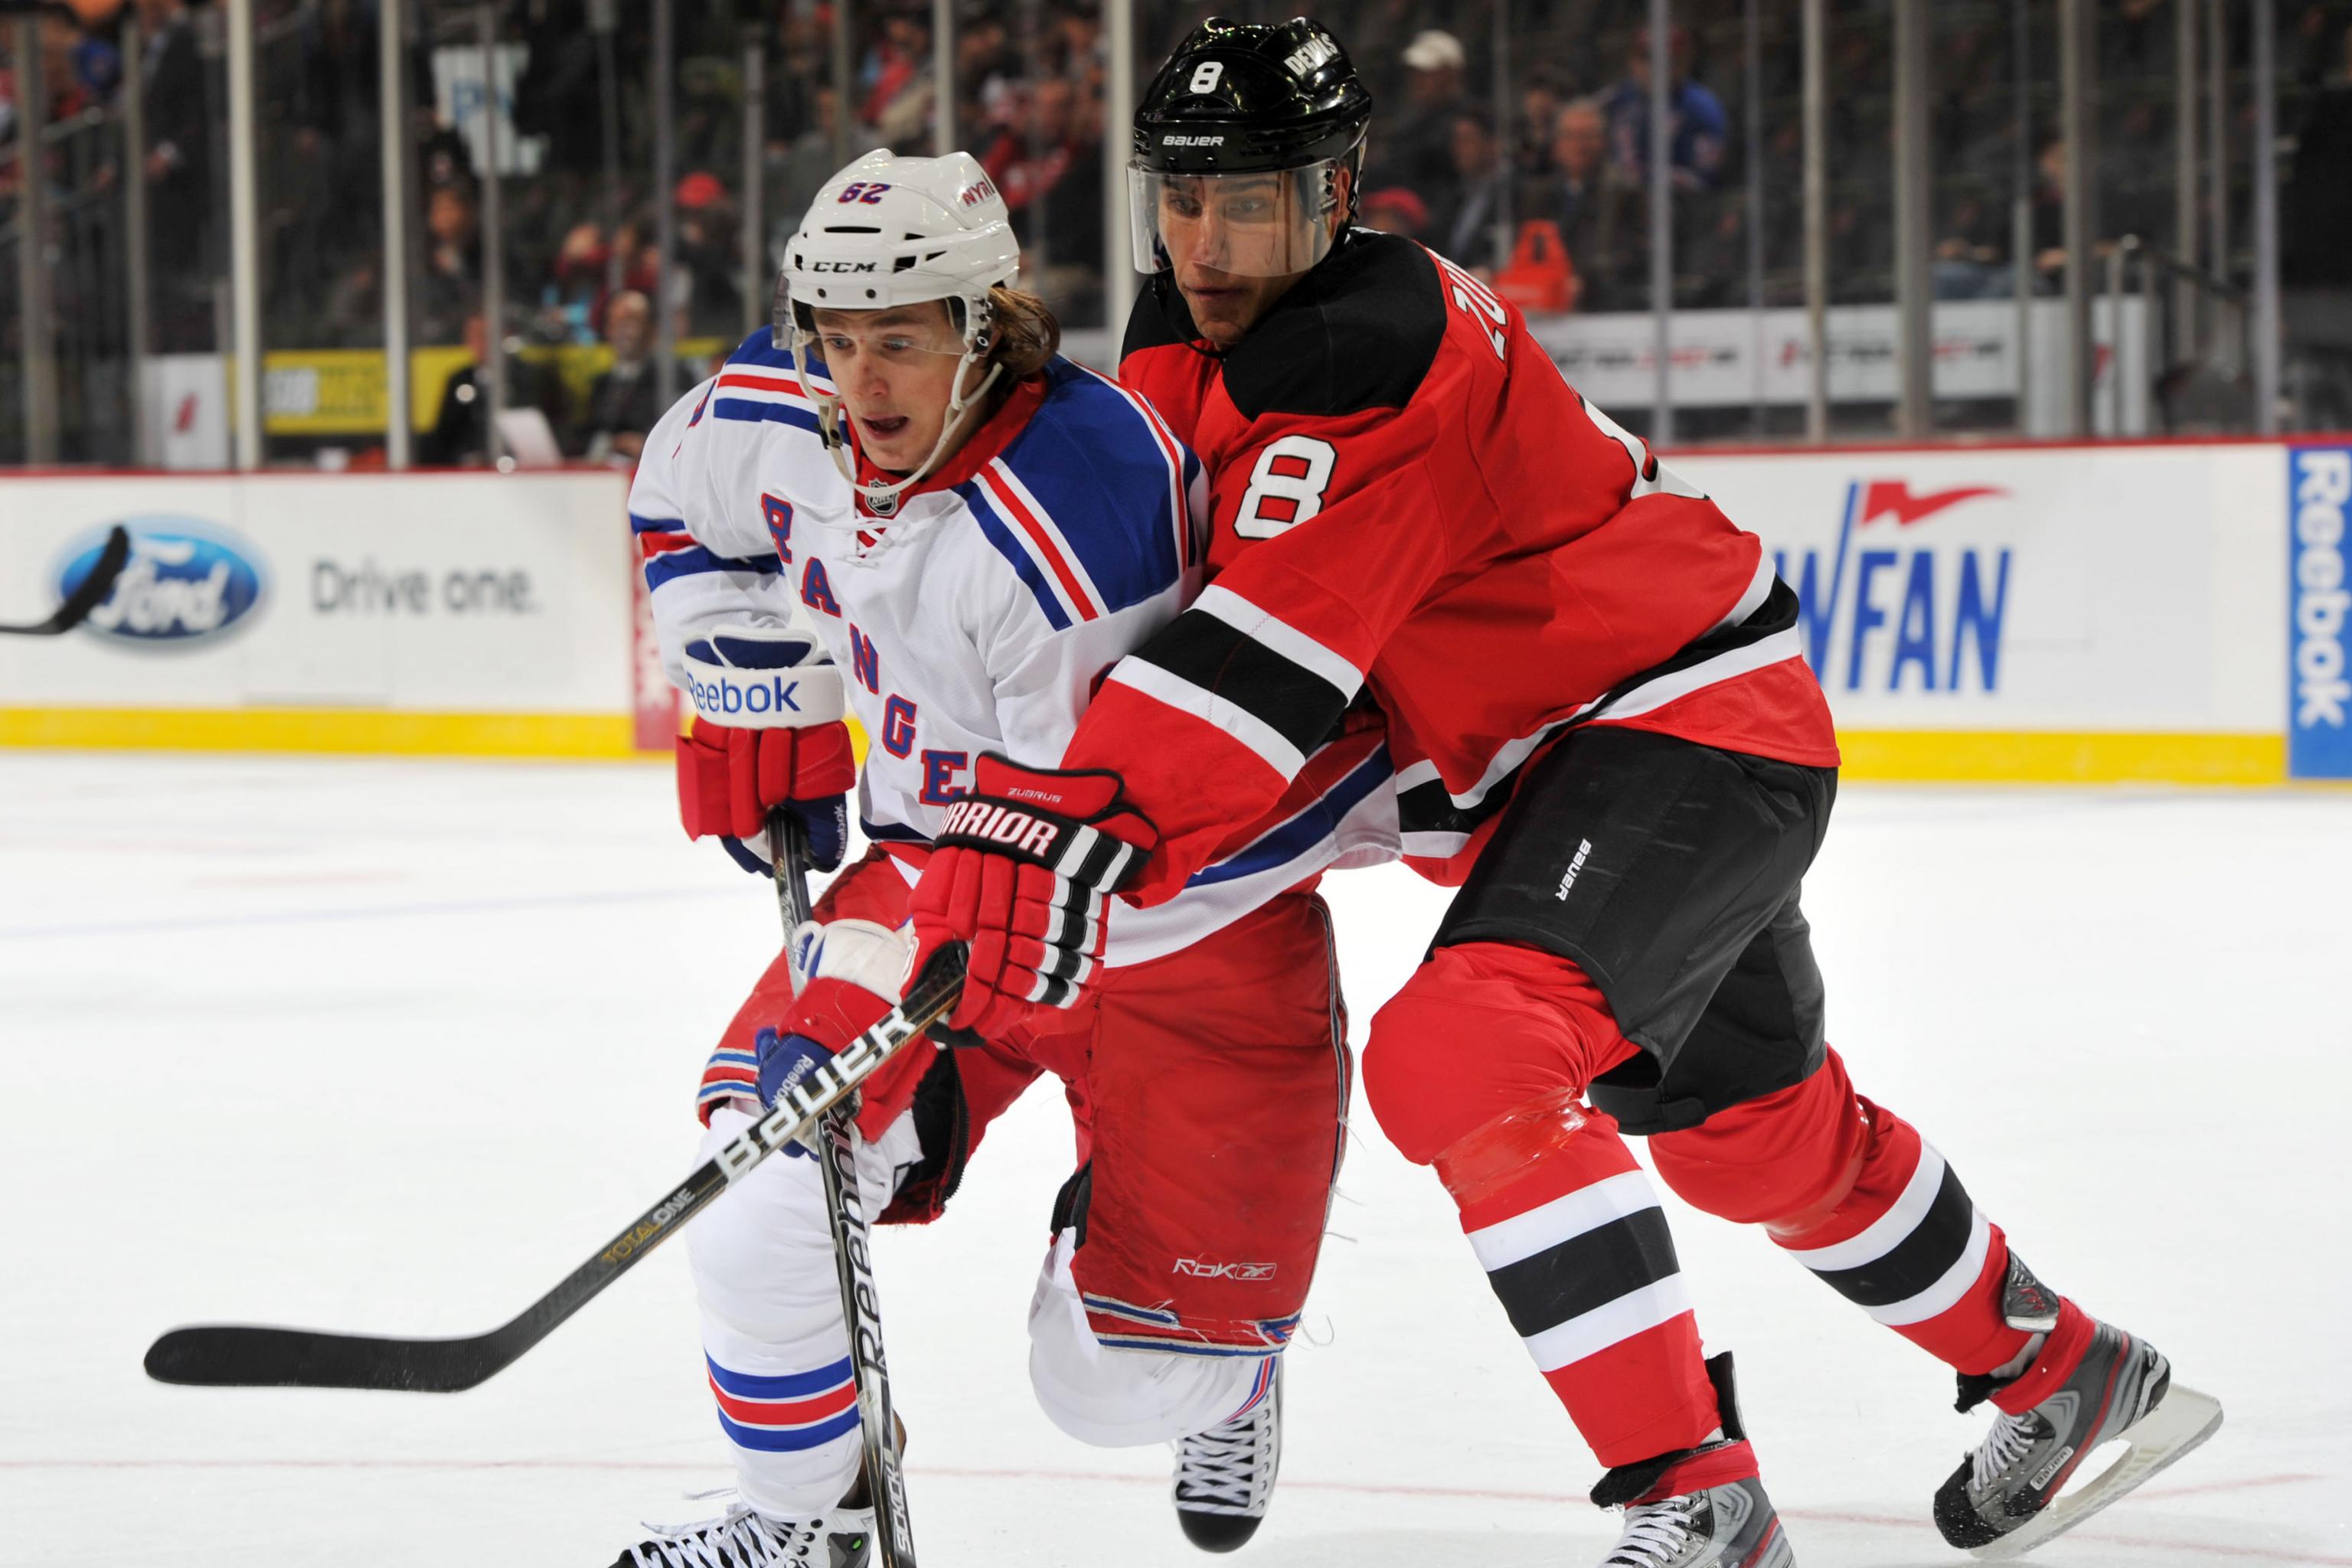 Devils beat Capitals in OT, will face Rangers in 1st round - North Bay News